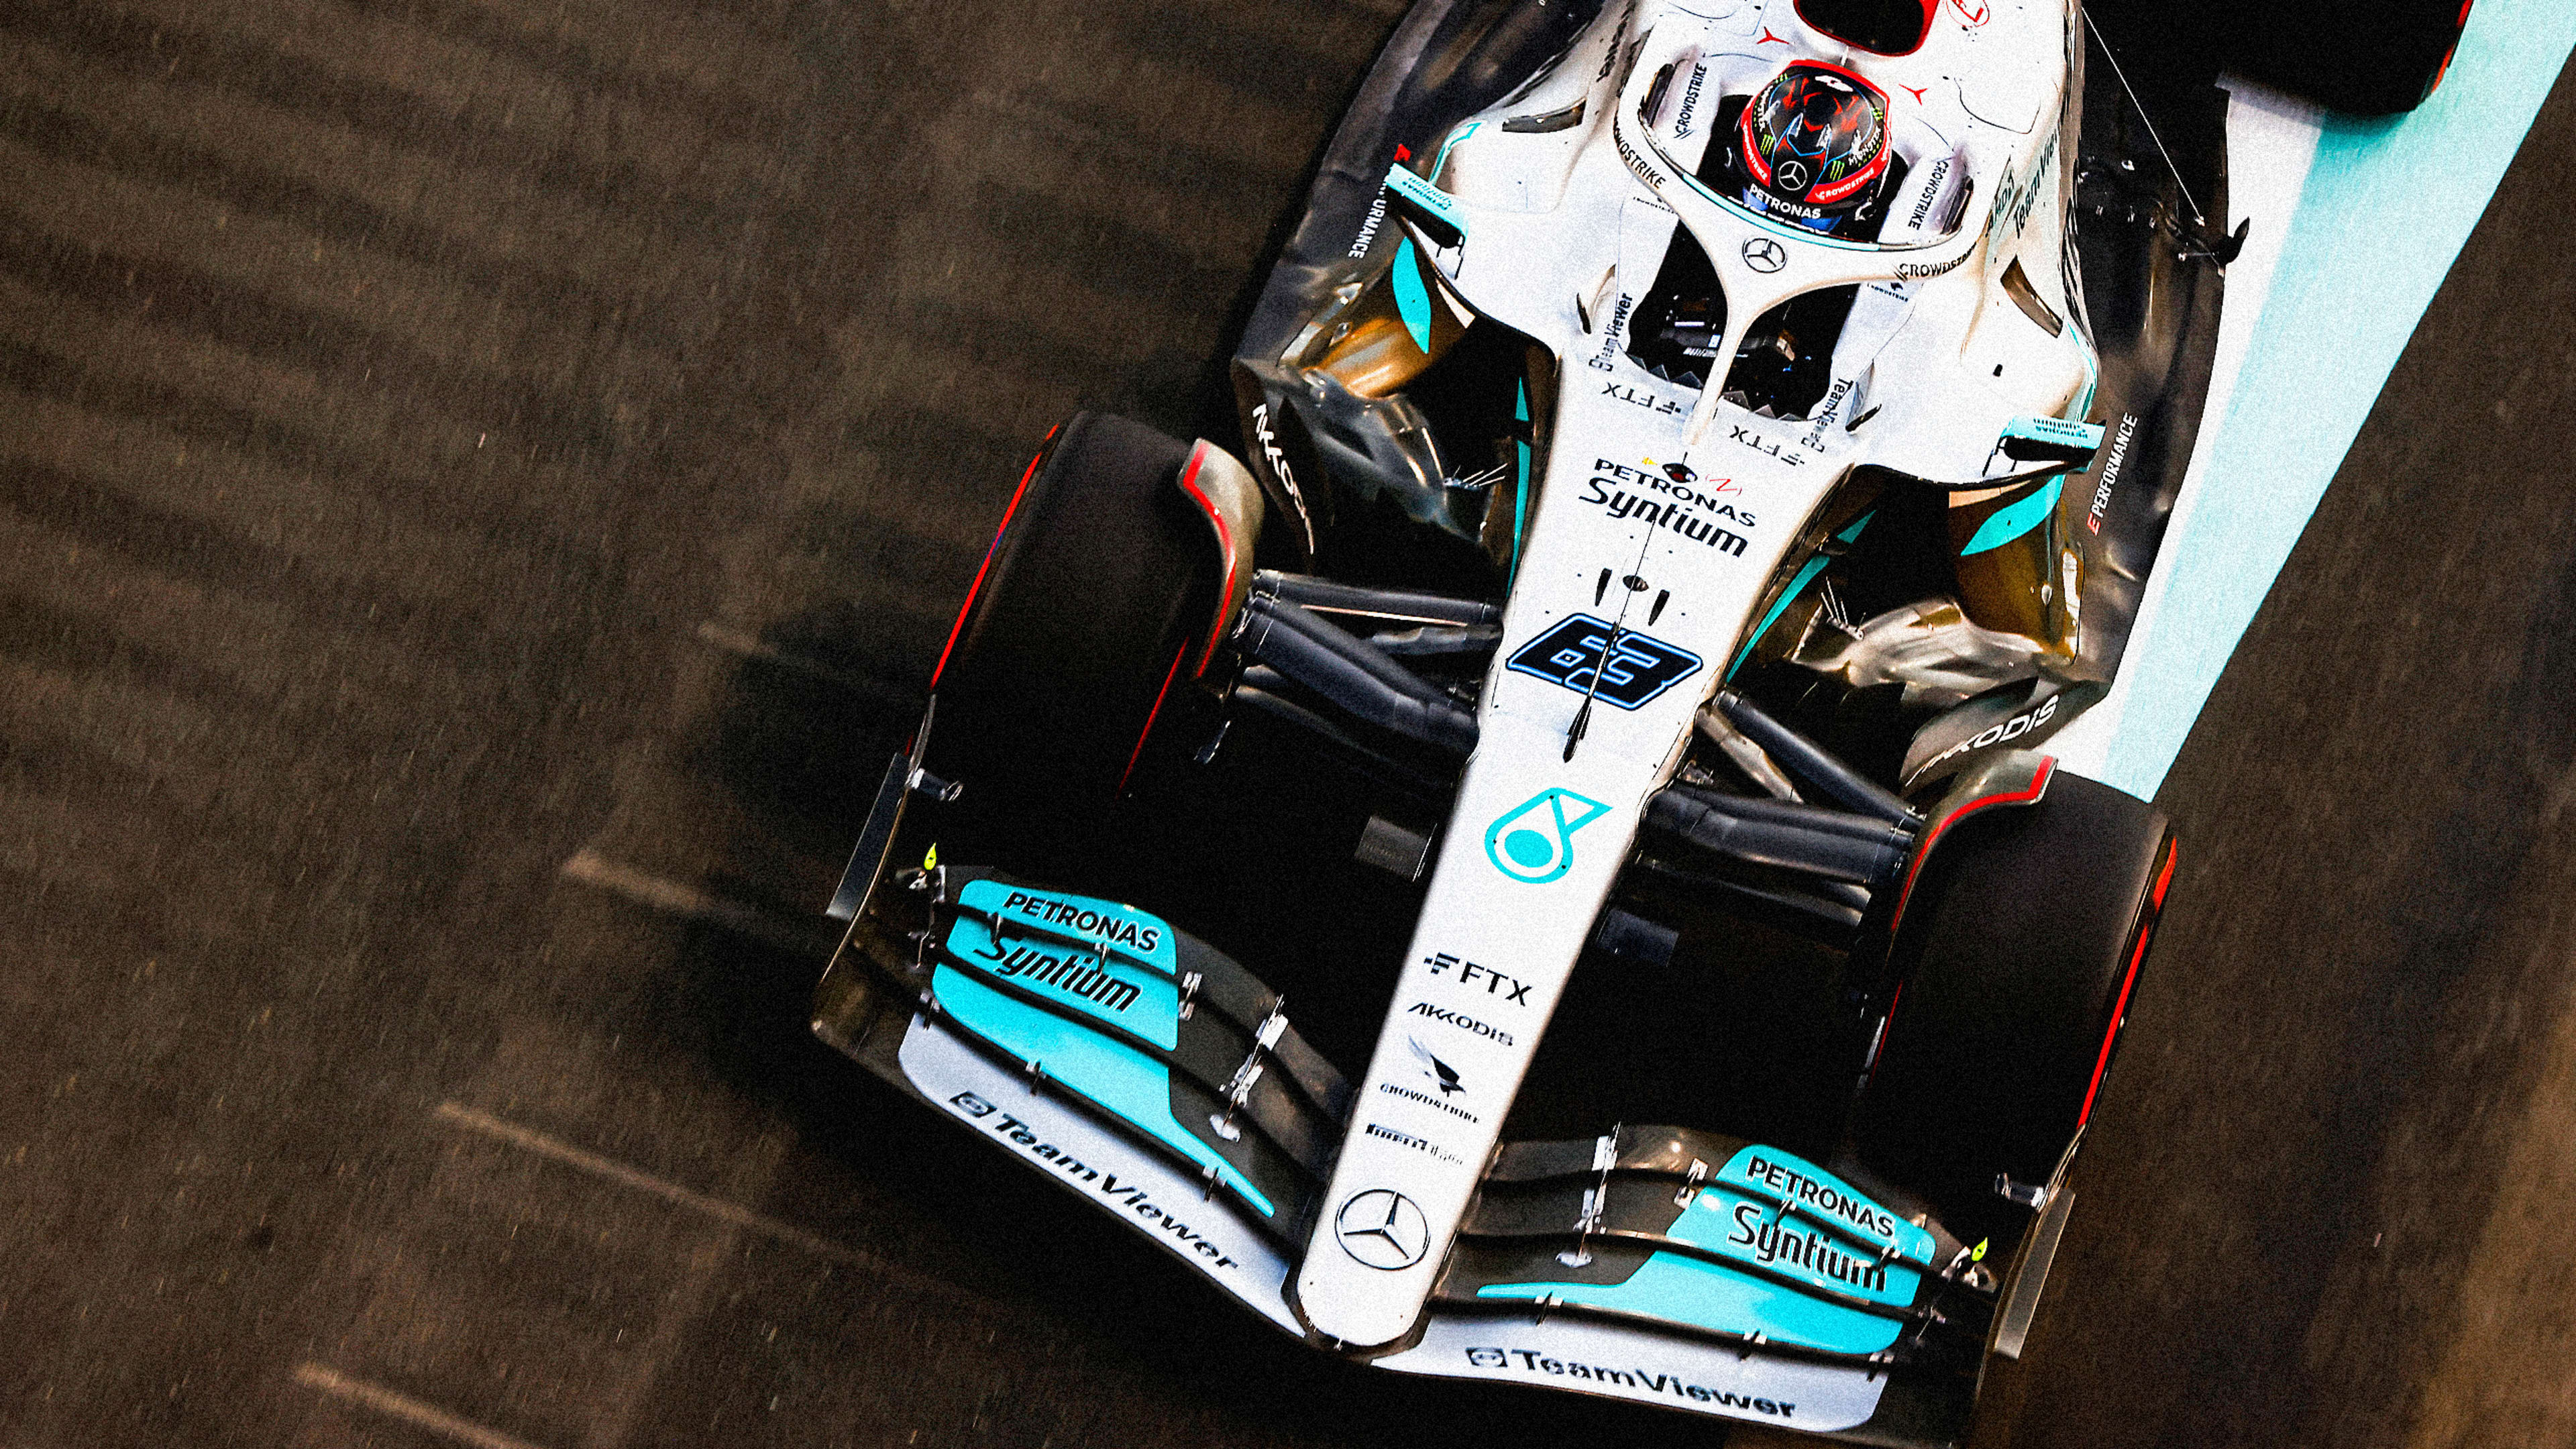 Mercedes Formula One was skeptical of crypto sponsorships. Now it’s racing to drop FTX